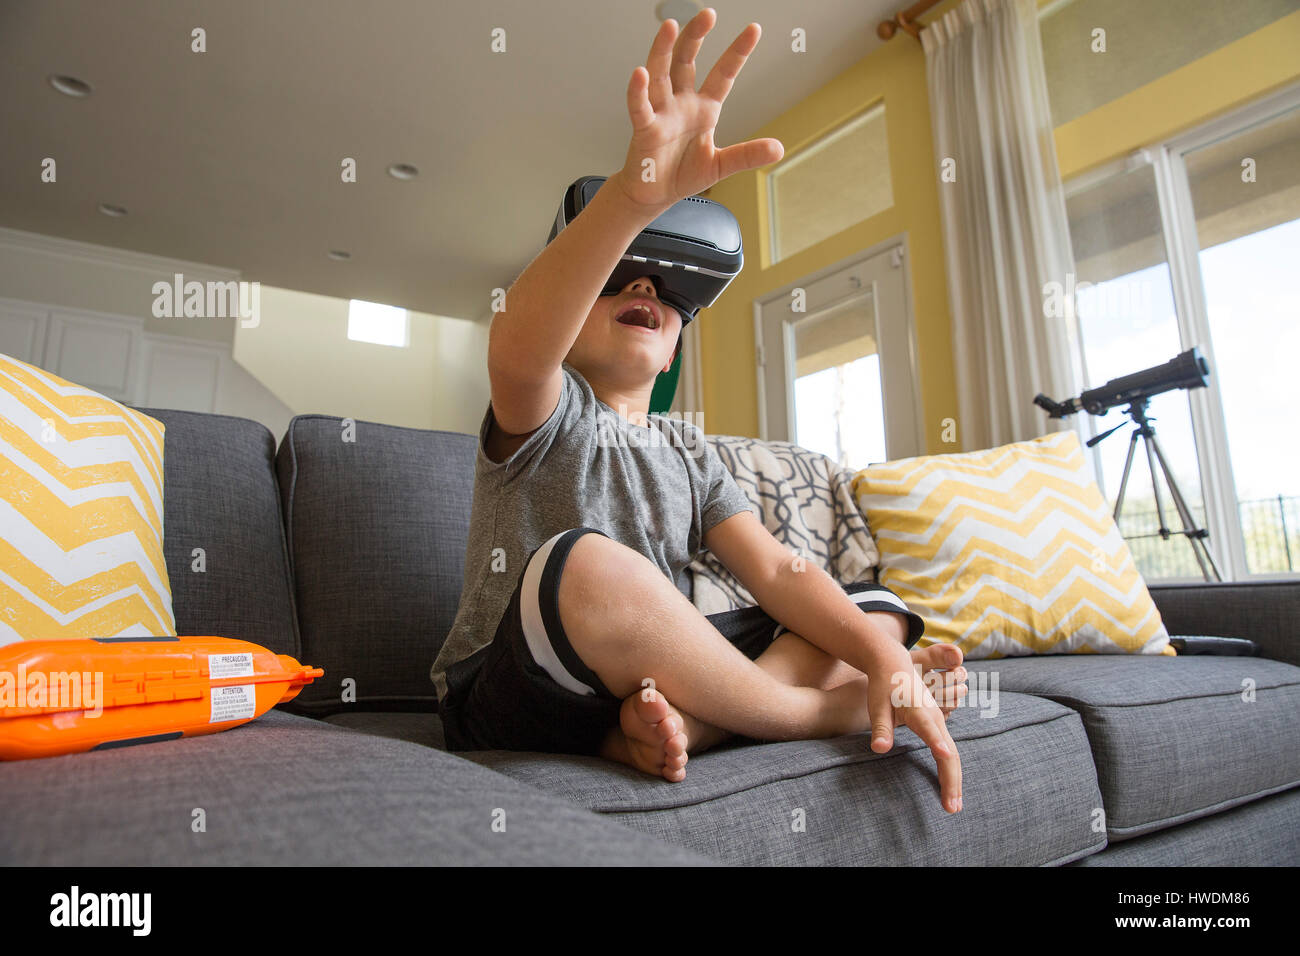 Young boy sitting cross legged on sofa, wearing virtual reality headset,  hands reaching out in front of him Stock Photo - Alamy